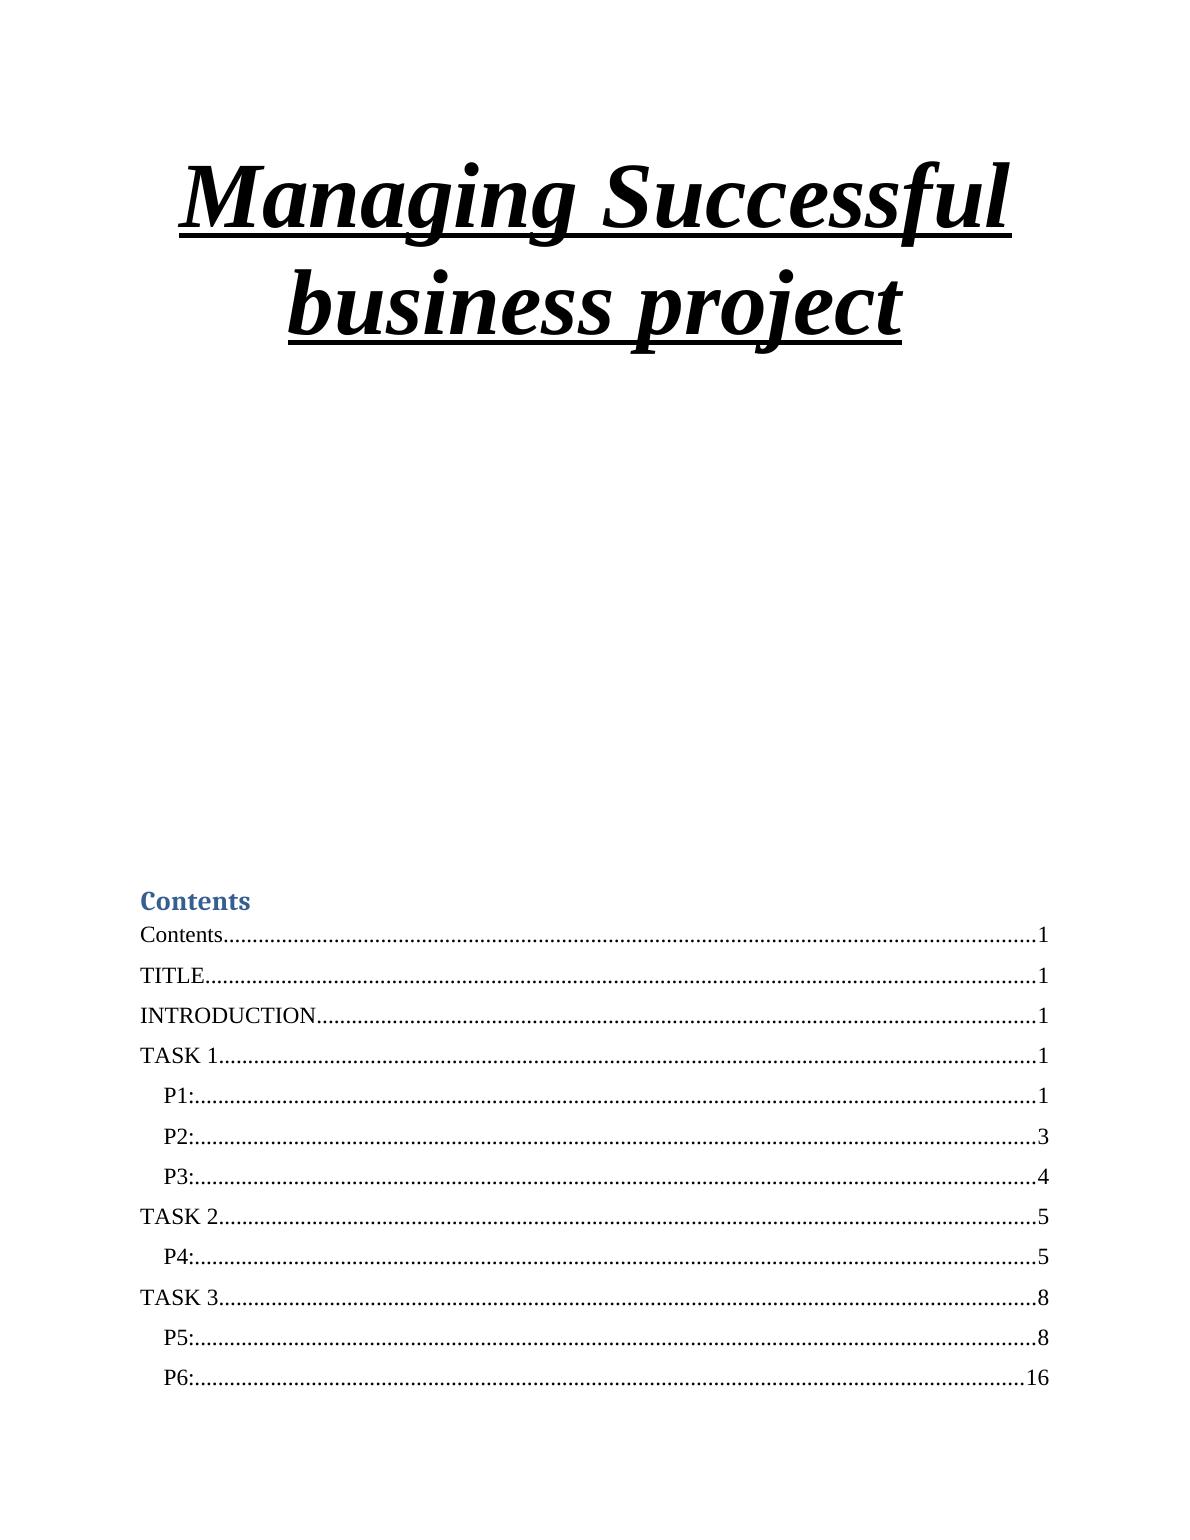 Managing Successful Business Project Contents_1